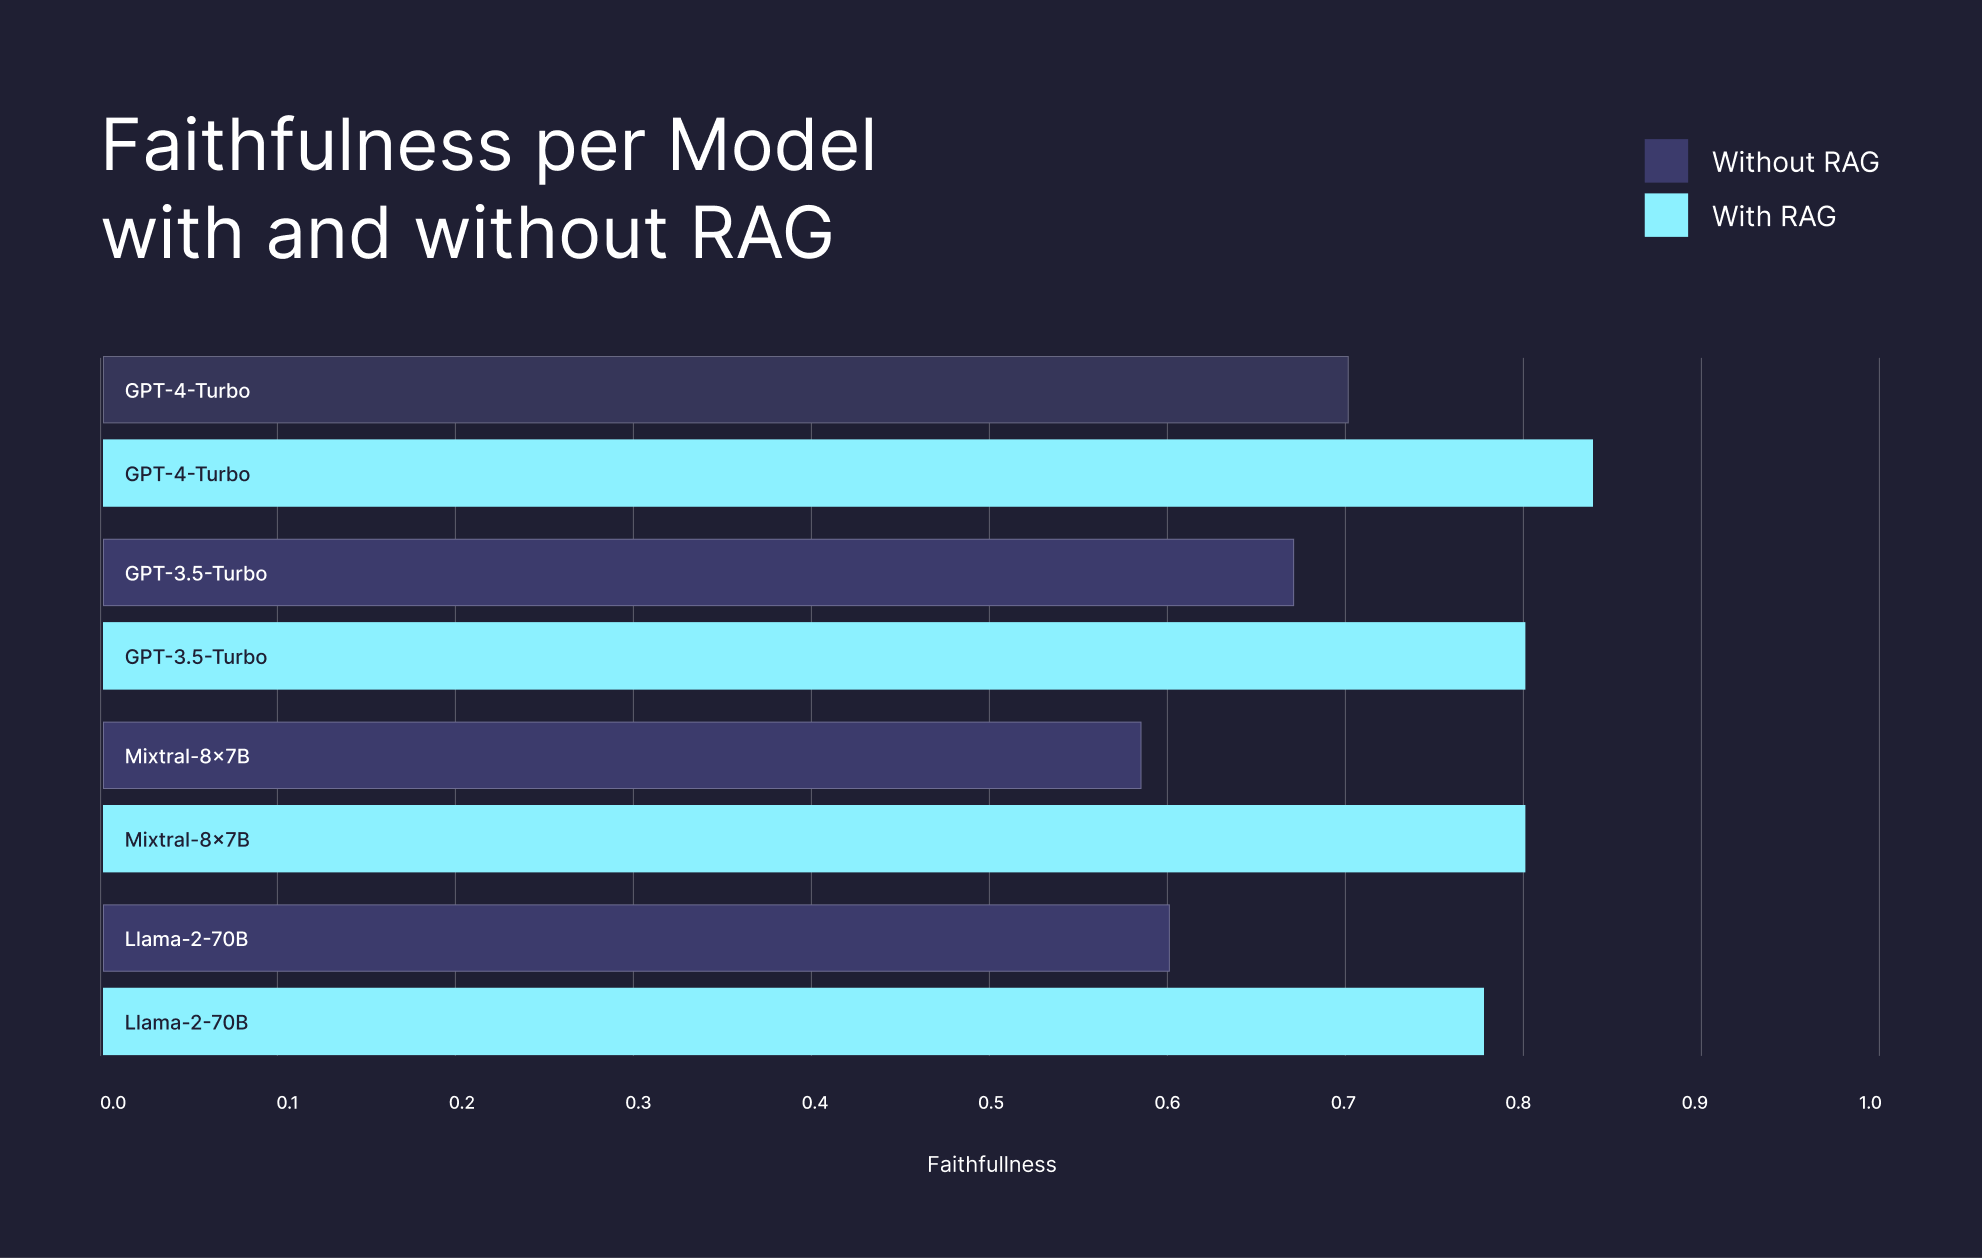 Diagram - the faithfulness of popular LLMs with and without RAG. Adding RAG means smaller models like Llama-2-70b can outperform larger SotA models like GPT-4.